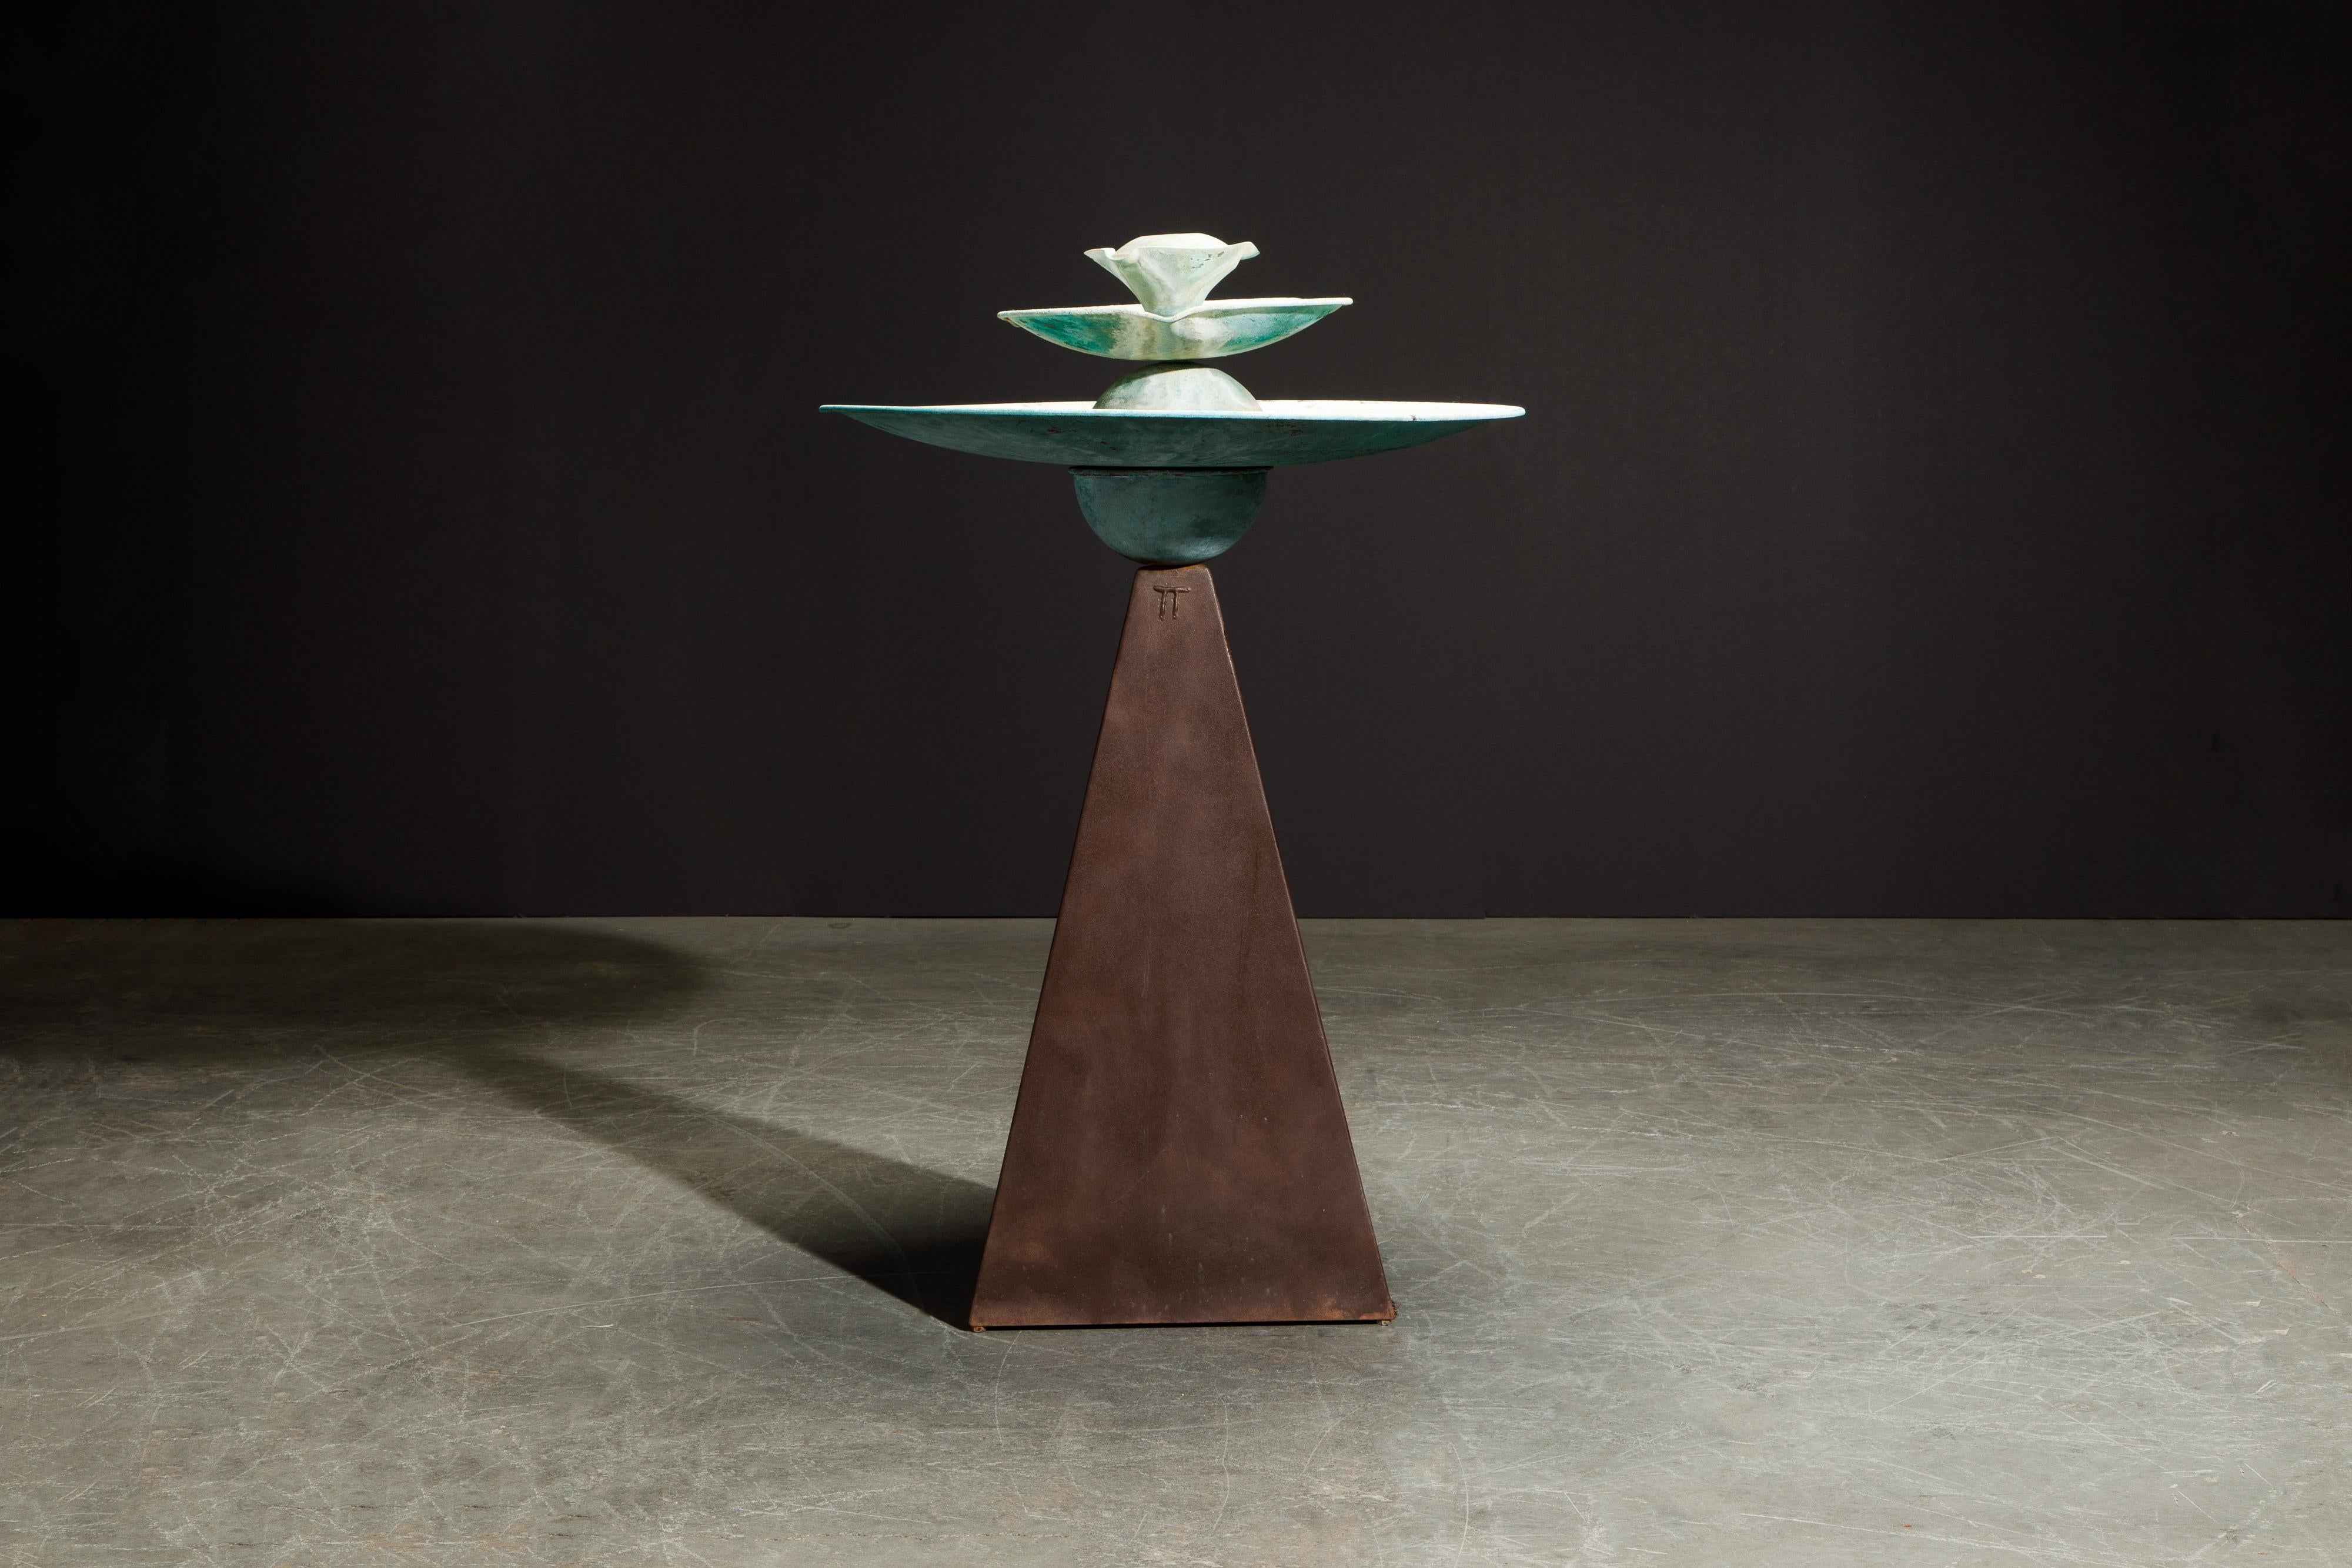 This patinated copper and steel sculpture is called the 'Pyramid' Triple Fountain by renown artist and sculptor Tom Torrens, circa 1990s. Featuring a patinated verdigris copper fountain on top of a pyramid shaped weathered steel base, the original